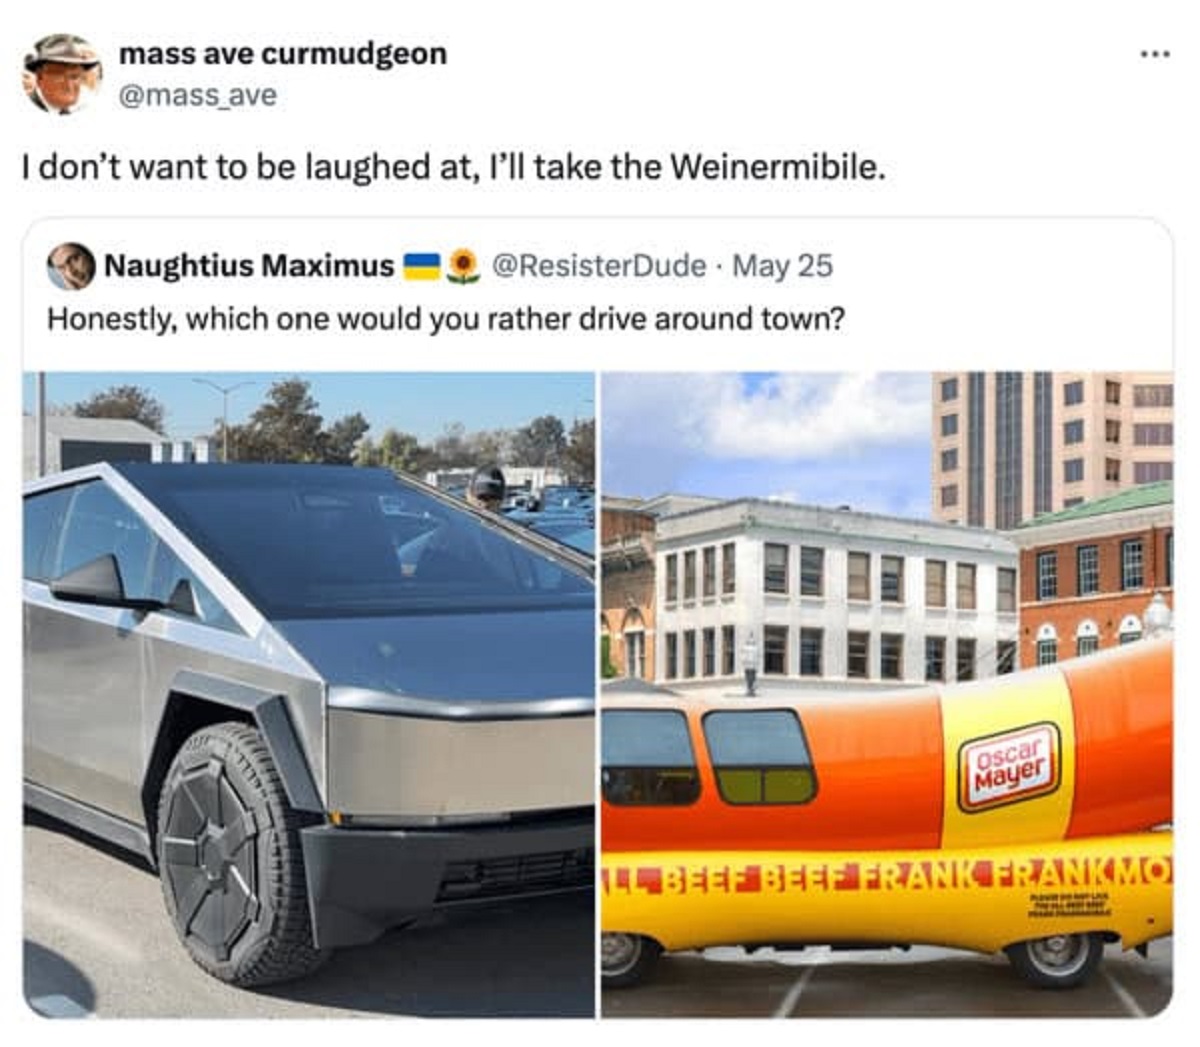 wienermobile new name - mass ave curmudgeon I don't want to be laughed at, I'll take the Weinermibile. Naughtius Maximus May 25 Honestly, which one would you rather drive around town? Oscar Mayer Ll Beef Beef Frank Frankmo